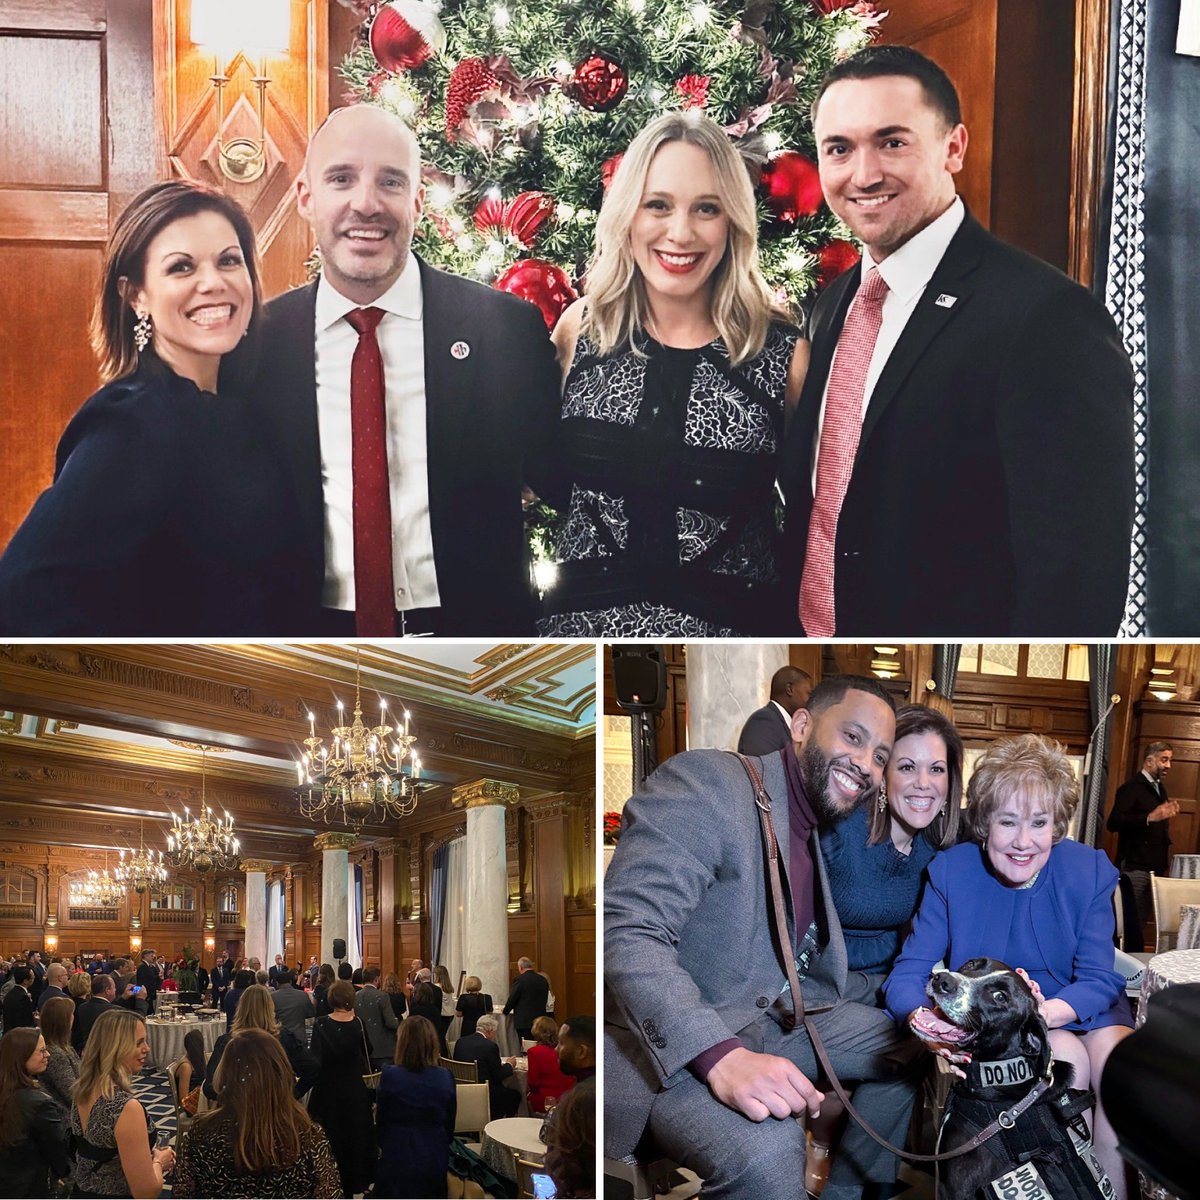 Great evening celebrating military & veteran caregivers at the @DoleFoundation’s holiday reception last night. 

@k9sforwarriors is proud to be a part of such a dedicated community!